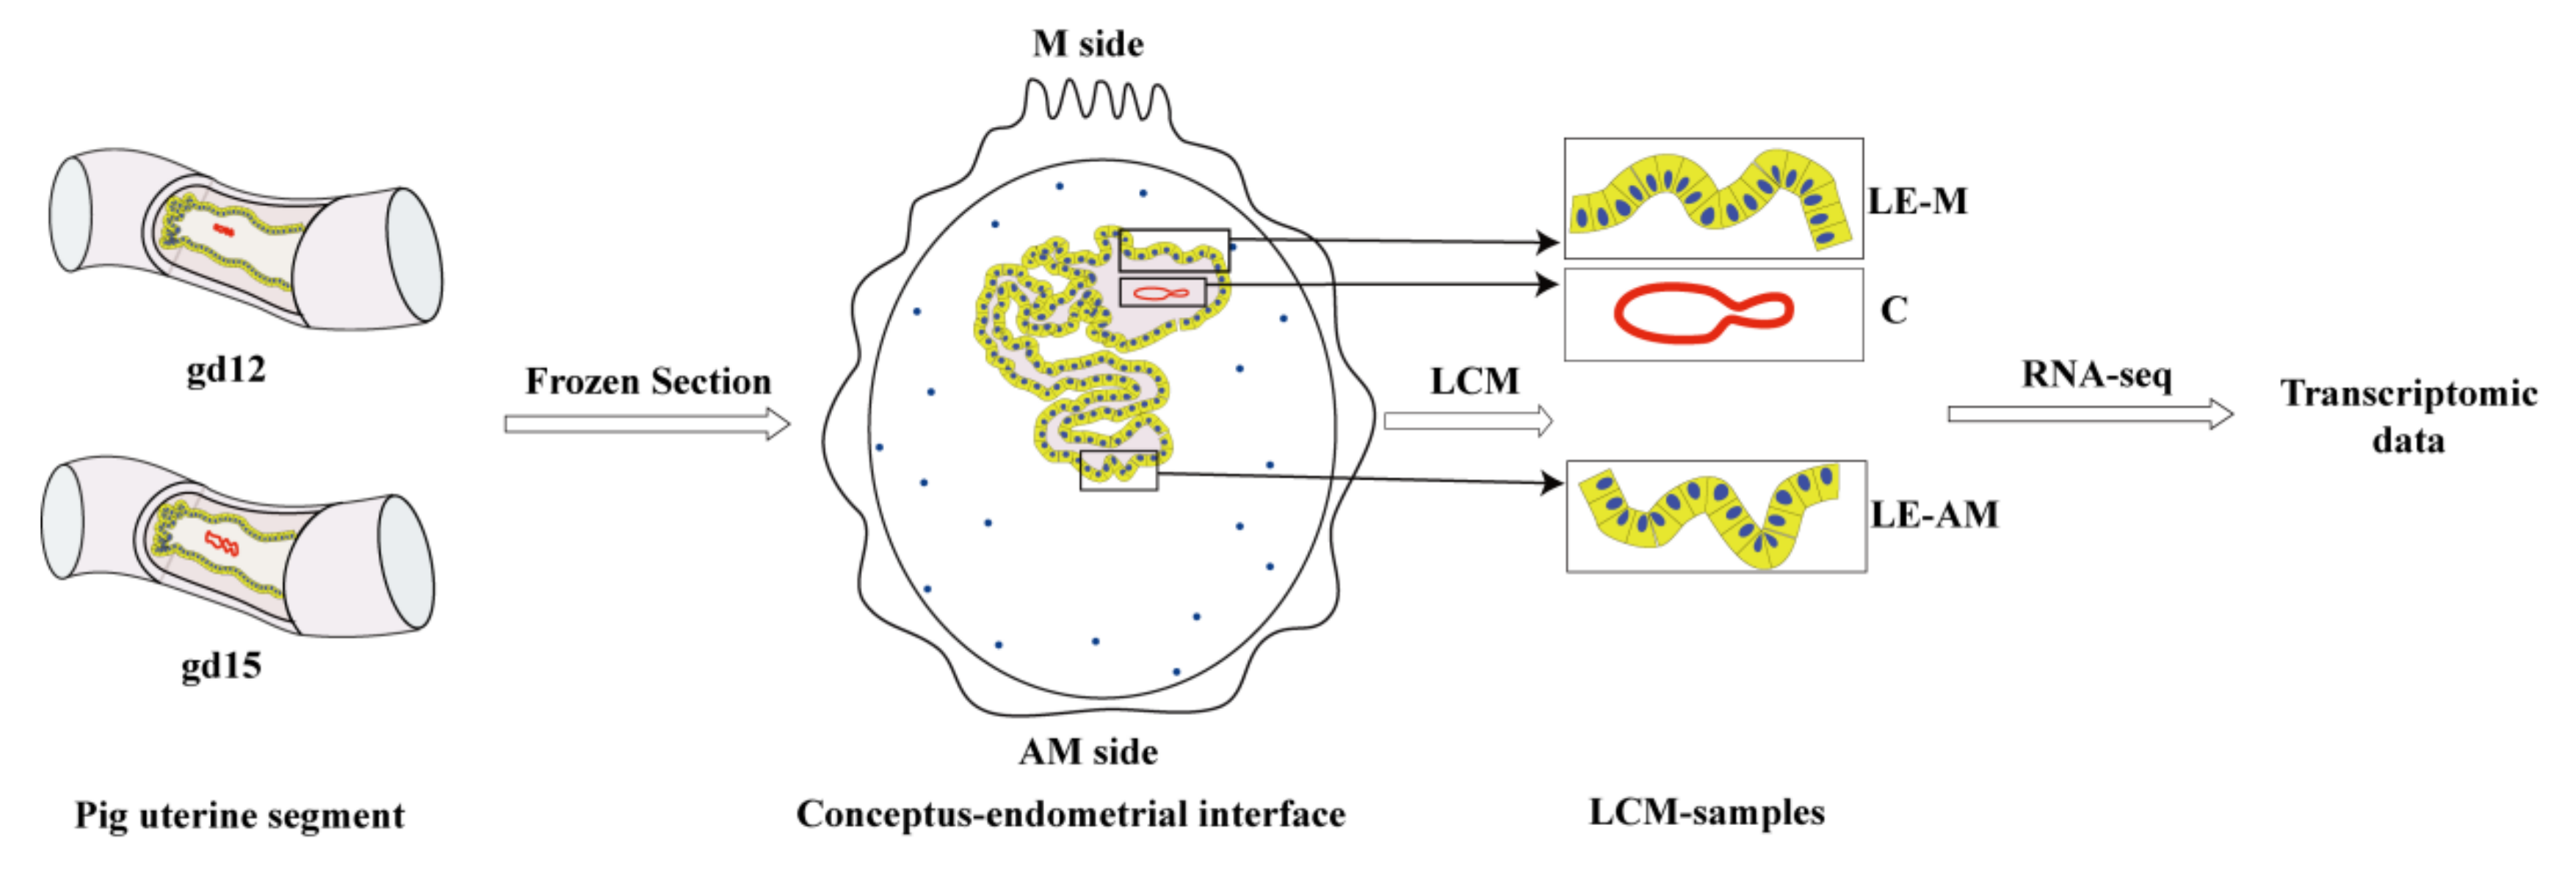 IJMS | Free Full-Text | Integrating LCM-Based Spatio-Temporal  Transcriptomics Uncovers Conceptus and Endometrial Luminal Epithelium  Communication that Coordinates the Conceptus Attachment in Pigs | HTML